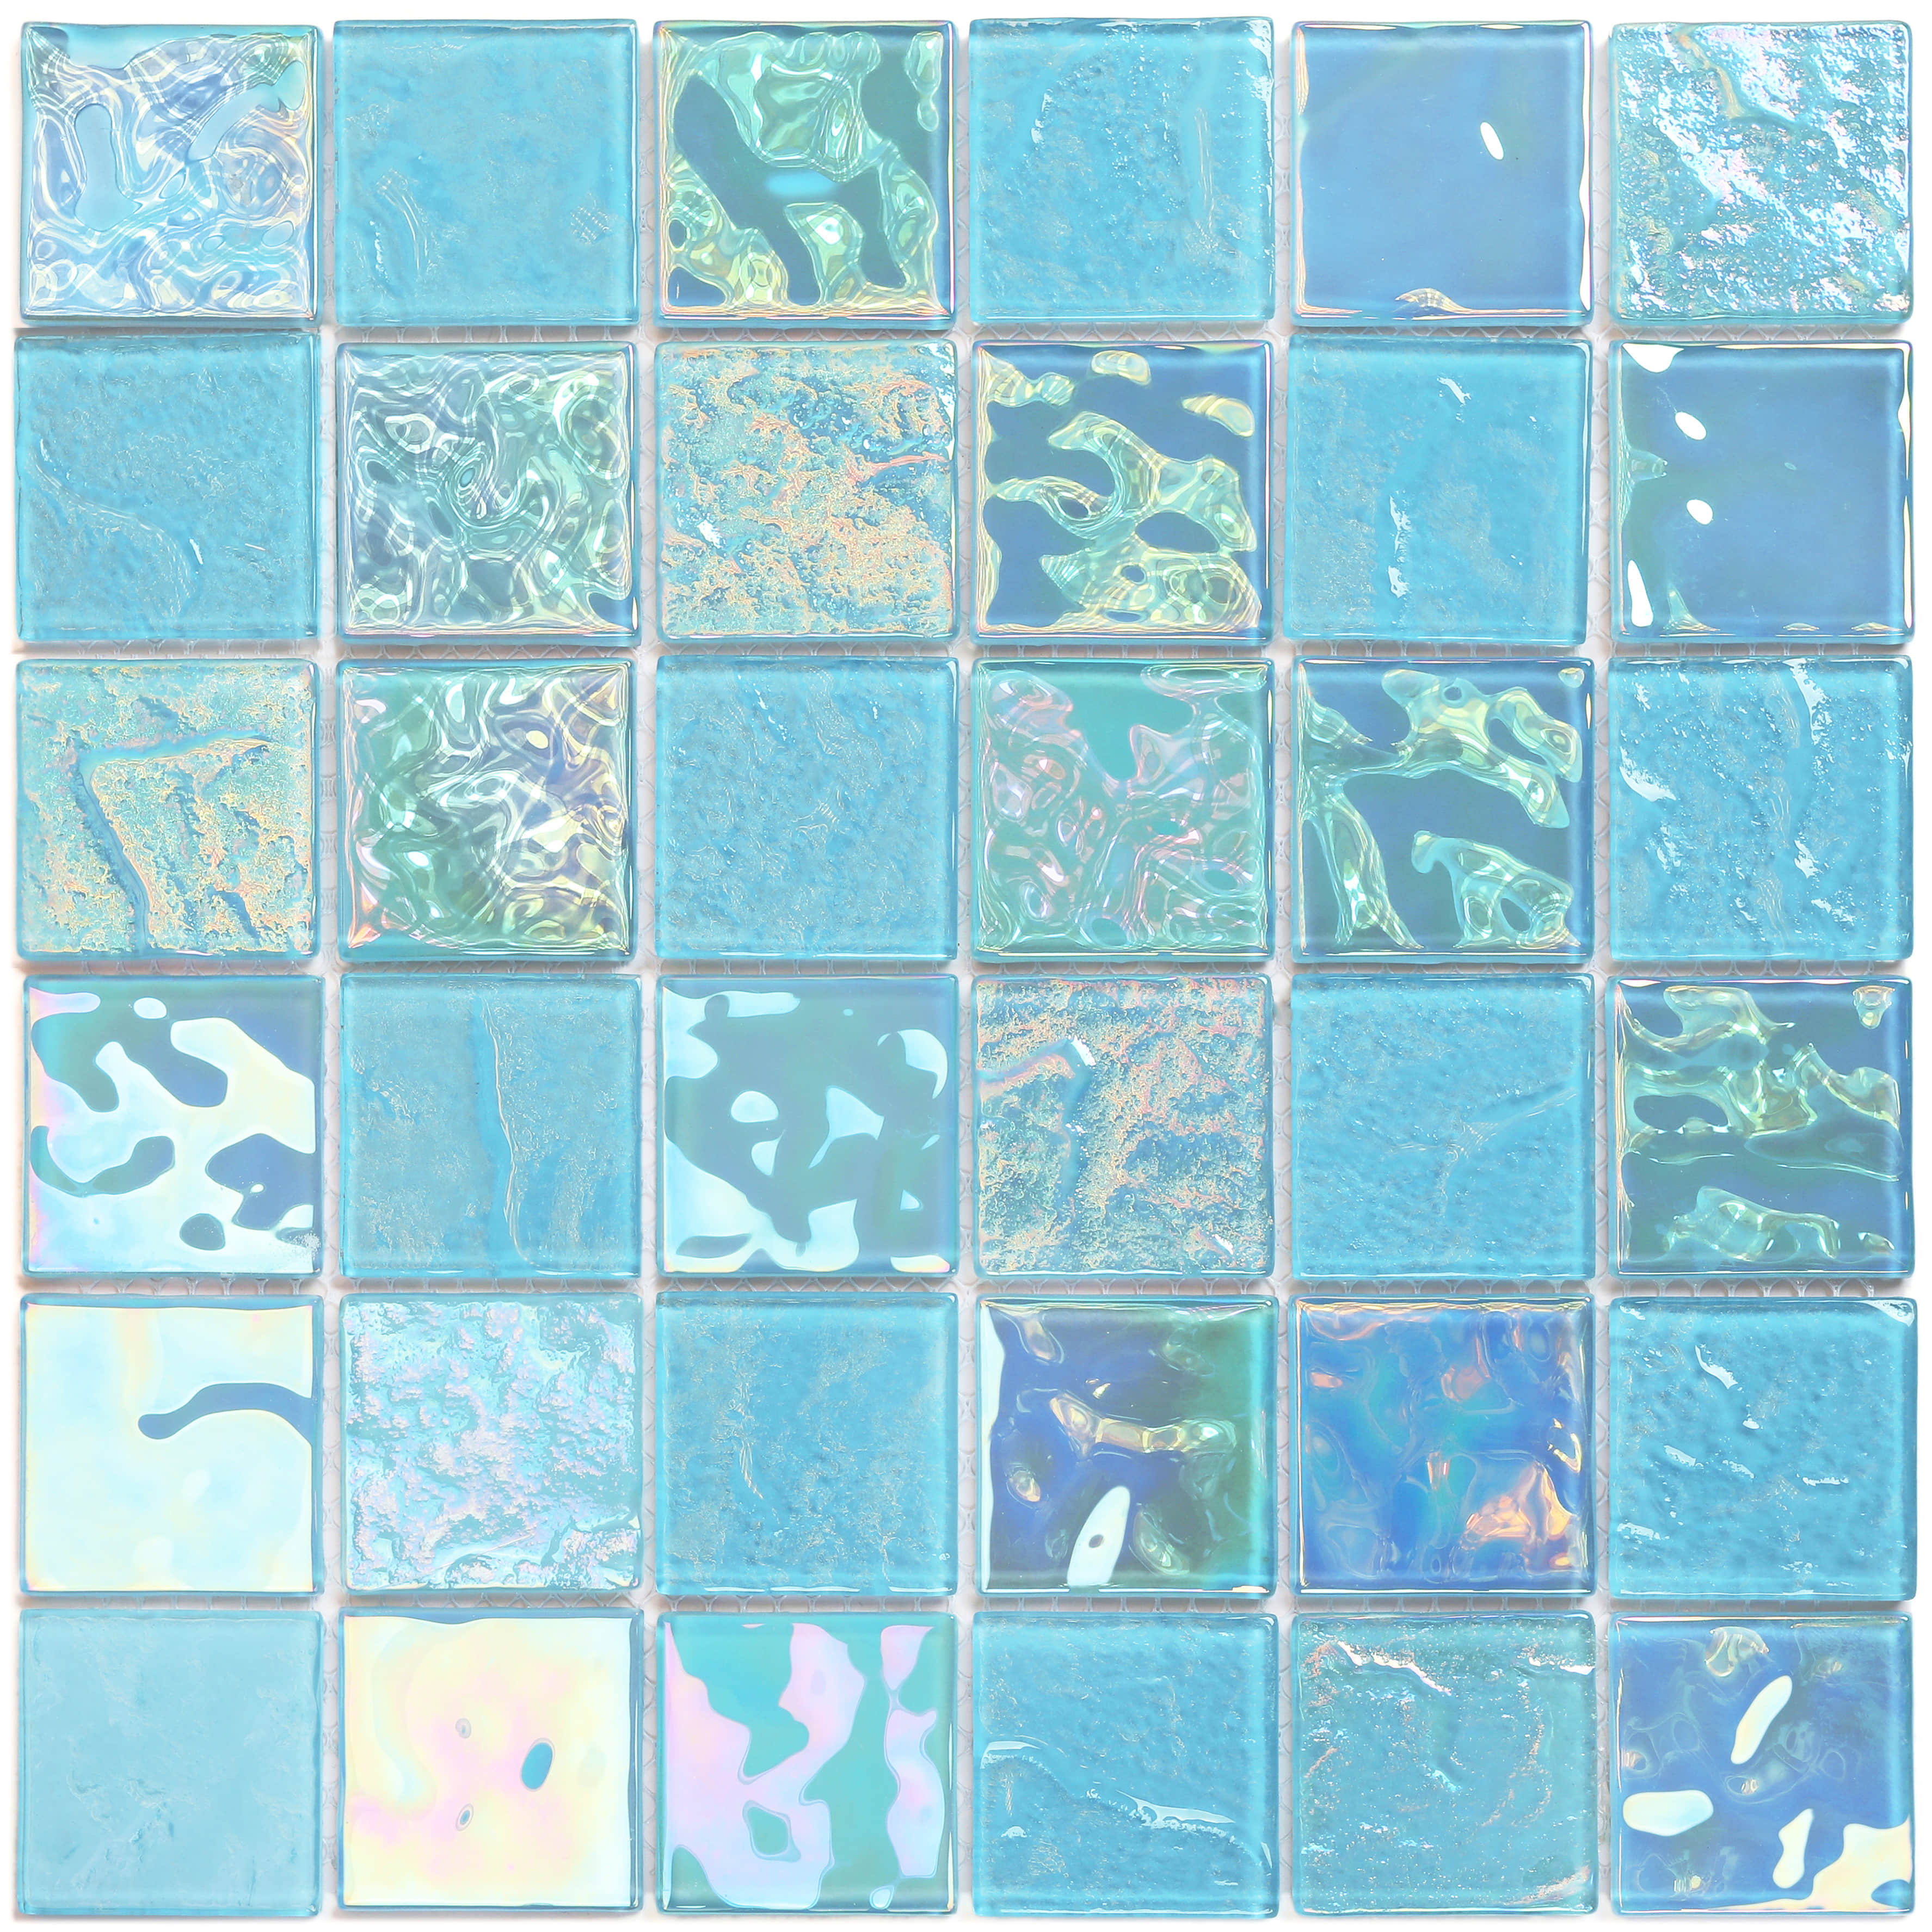 Clear crystal glass pool tiles